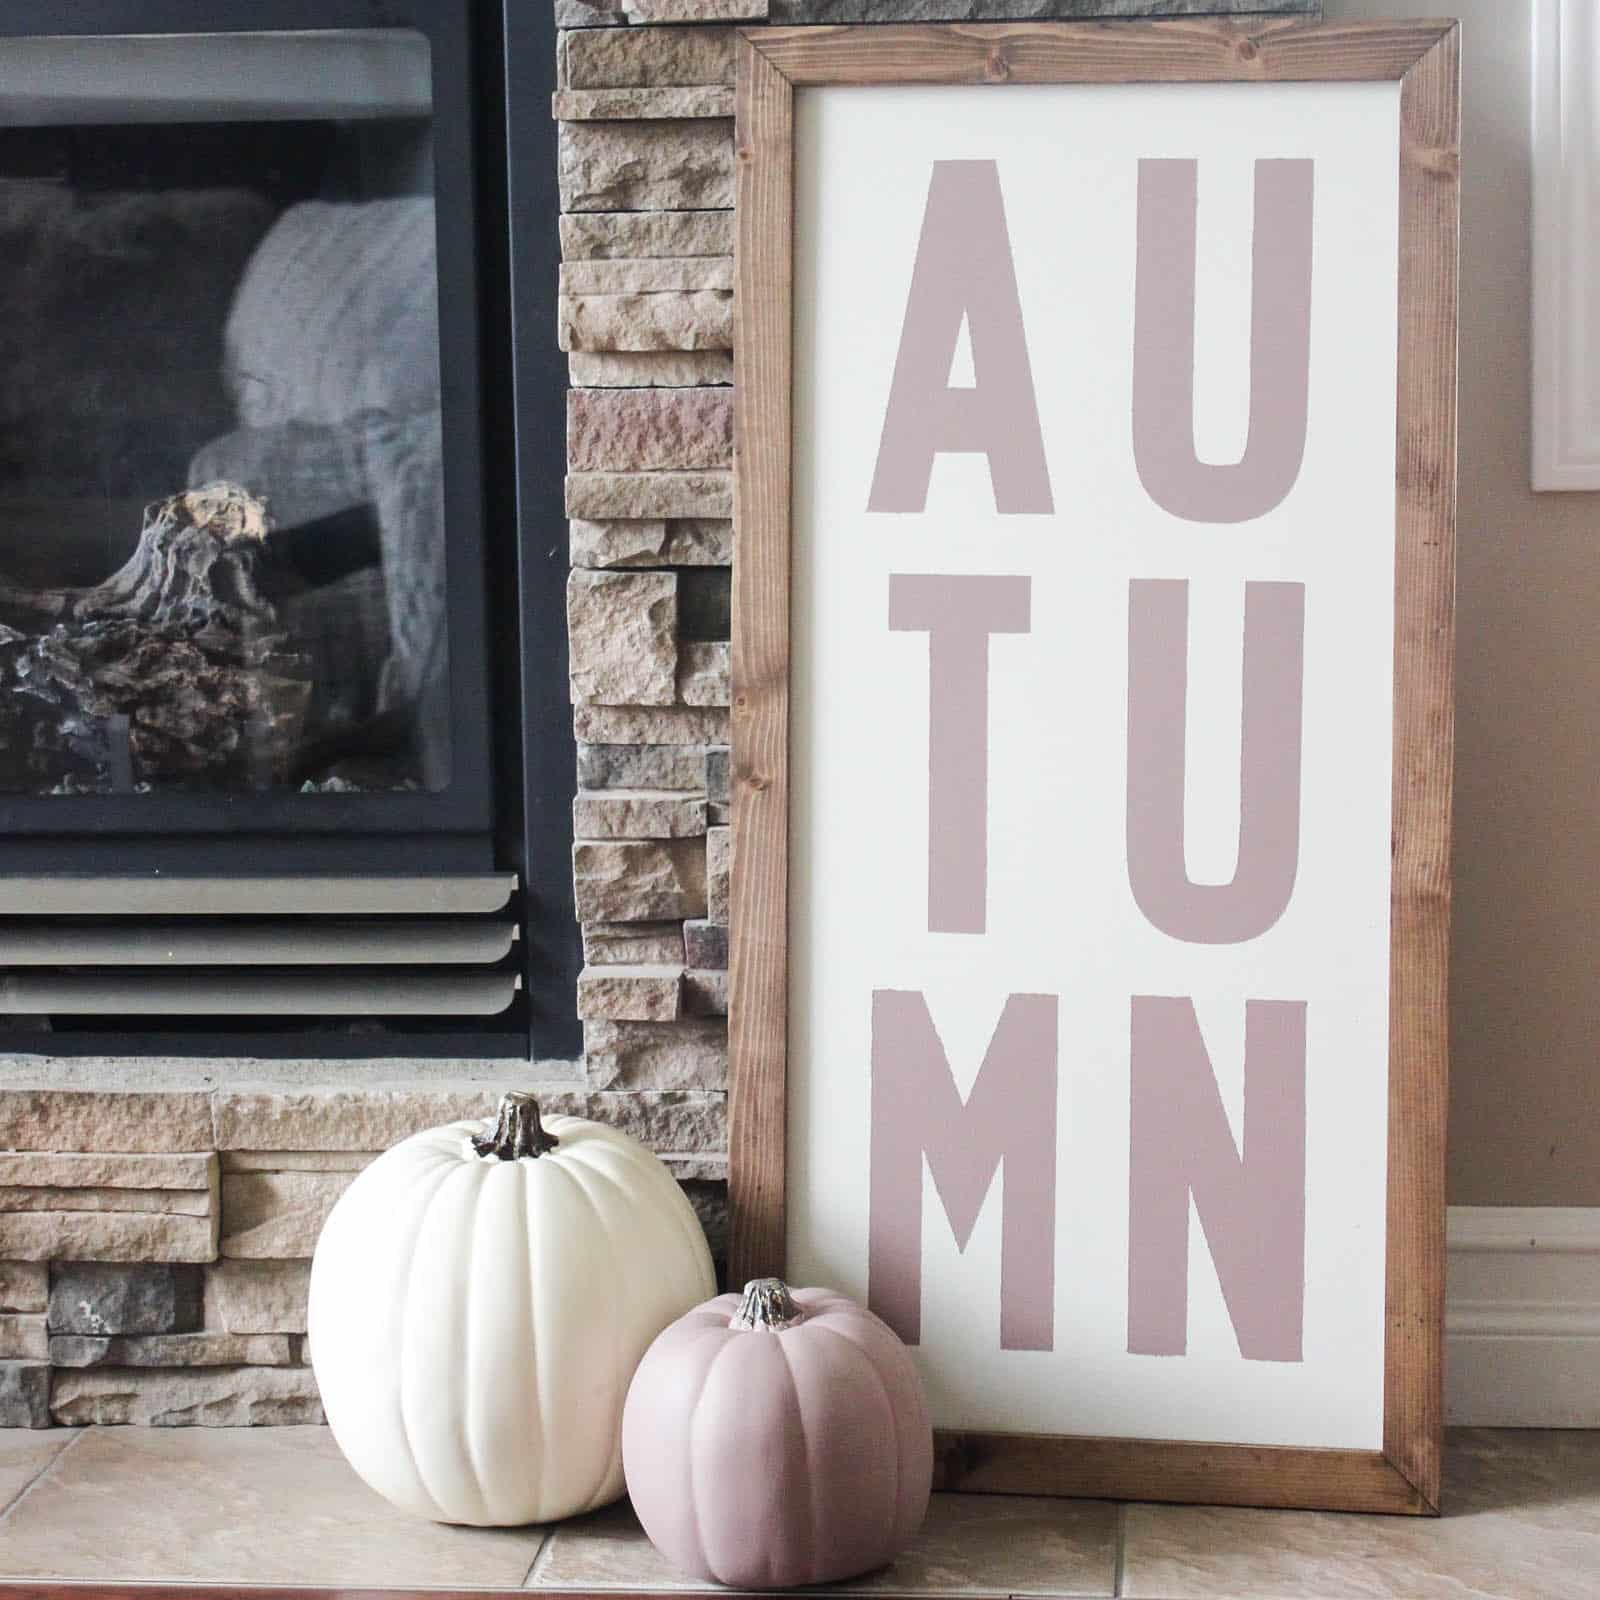 Love these Fall and Christmas custom wood signs! Beautiful decor for the fall and holiday seasons. Learn how you can make your own custom wood sign for the home with this simple DIY tutorial. The perfect sign and shape for your fireplace and mantle decor!